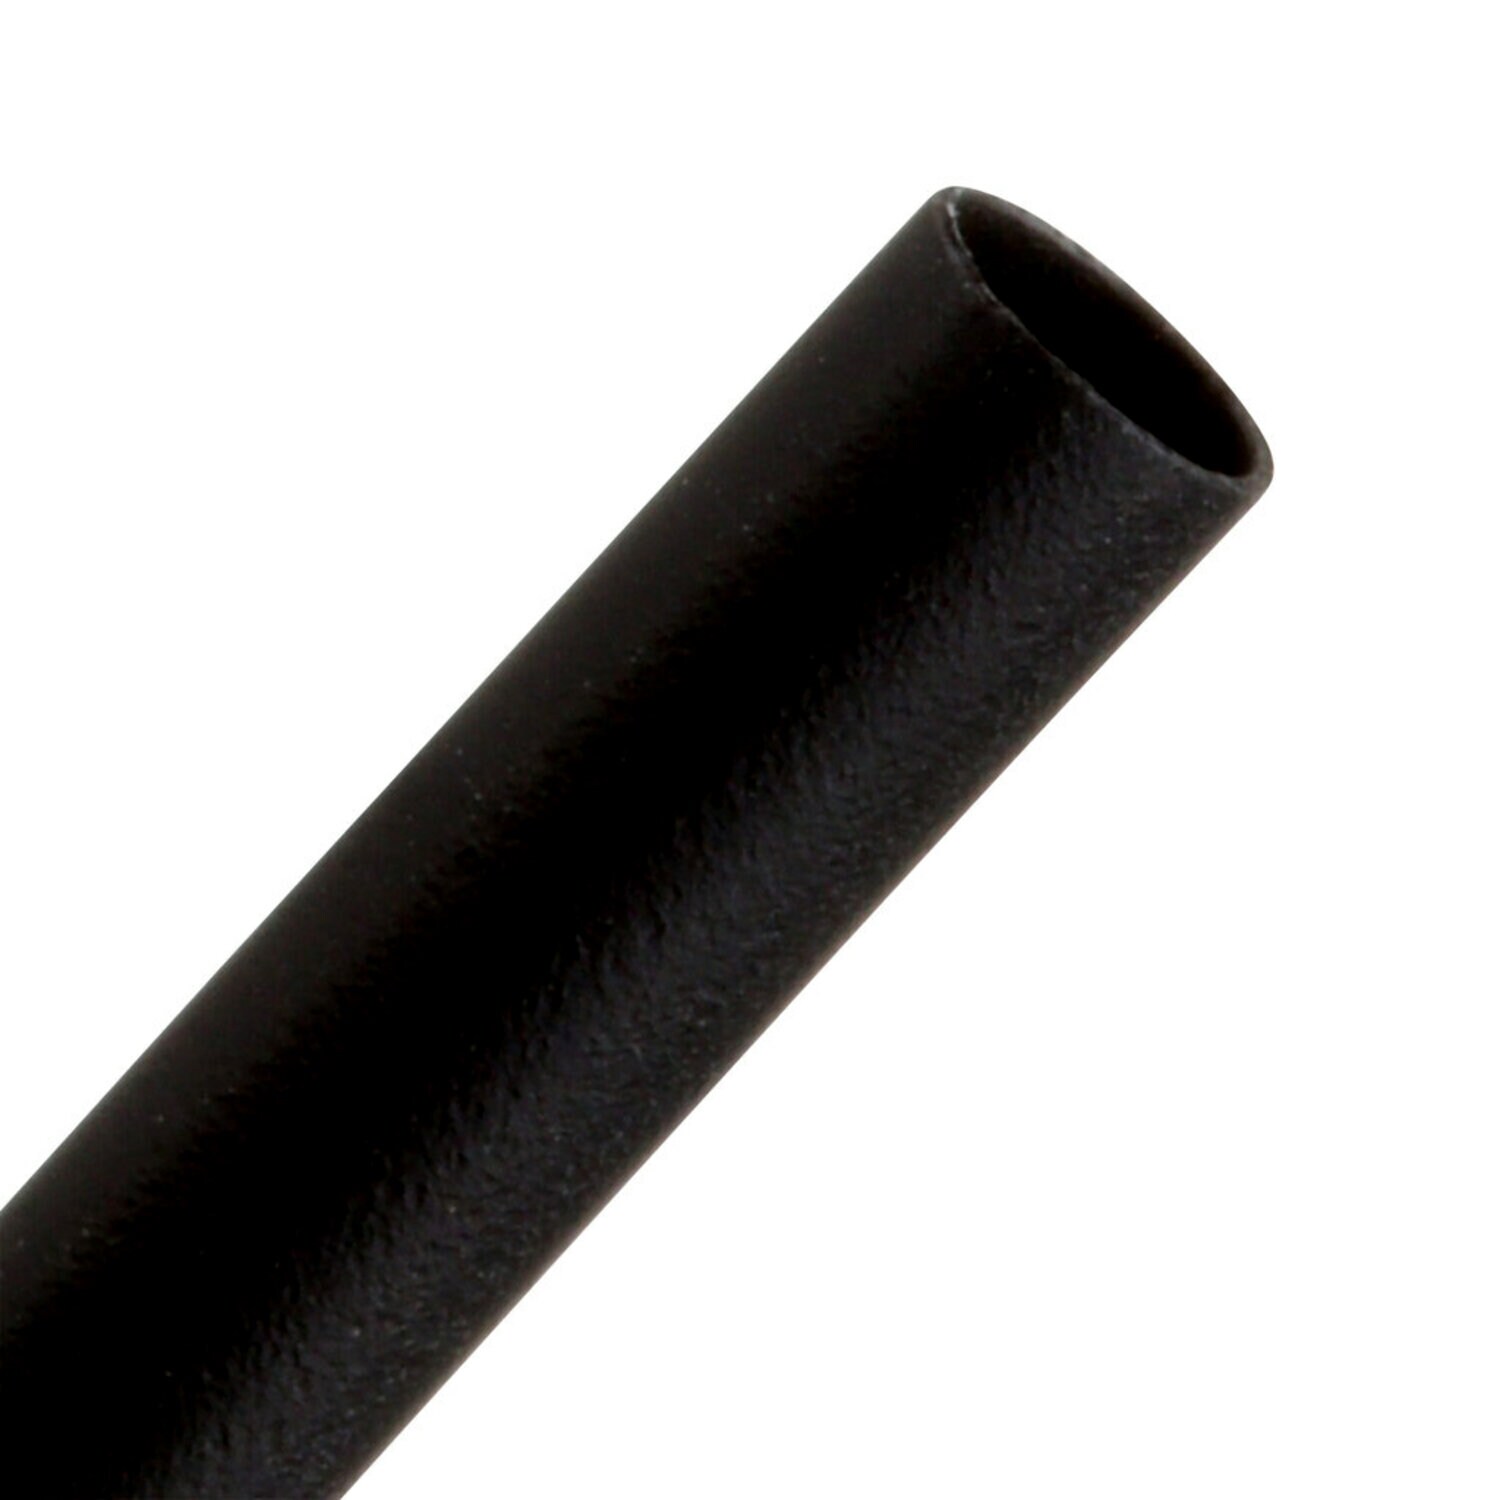 7000133690 - 3M Heat Shrink Thin-Wall Tubing FP-301-1/8-6"-Black-10-10 Pc Pks, 6 in
Length pieces, 10 pieces/pack, 10 packs/case